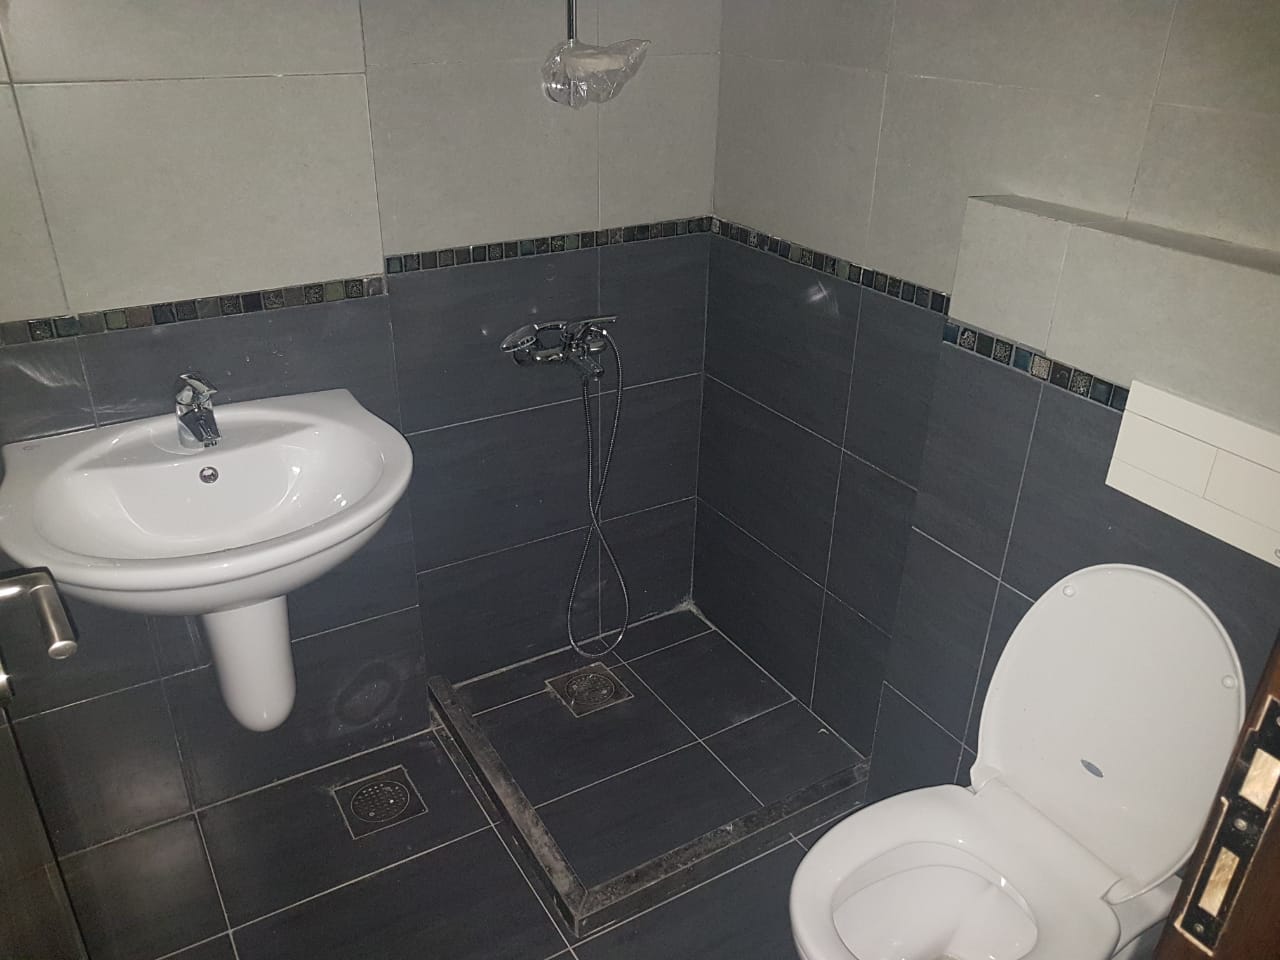 Apartment for sale in Haret Sakher, Jounieh, Lebanon, real estate in Haret Sakher Jounieh Lebanon, buy sell properties in Harte sakher jounieh Lebanon